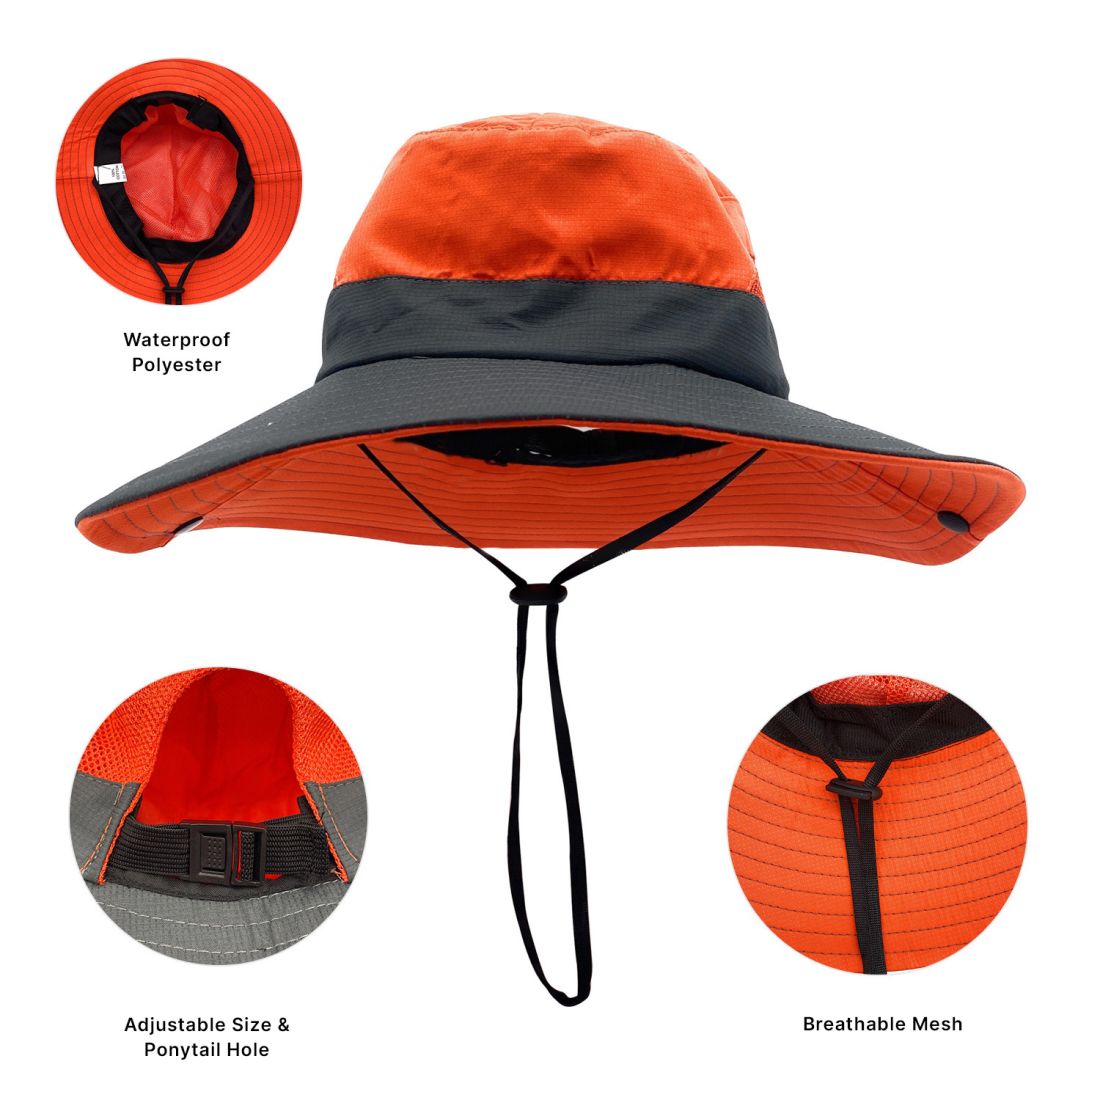 Empire Cove Womens Sun Hat Wide Ponytail Bucket Cap Sports UV Protection Orange, Women's, Size: One Size